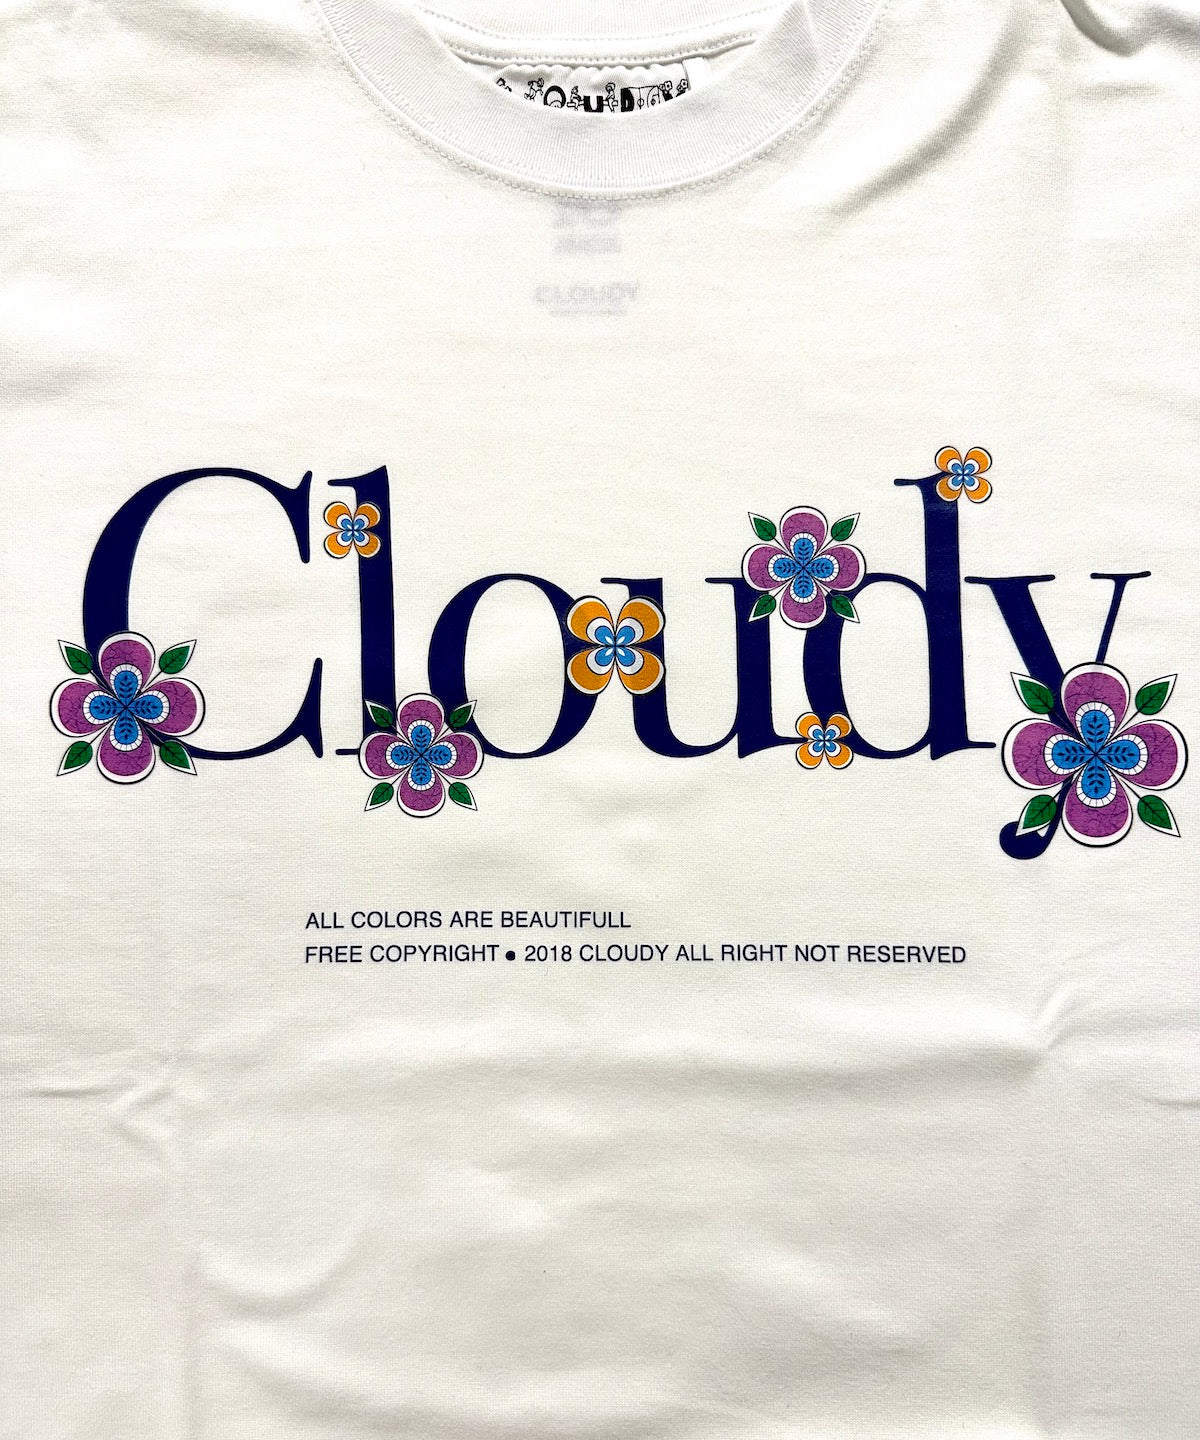 【For MAUI】Charity T-shirts WHITE